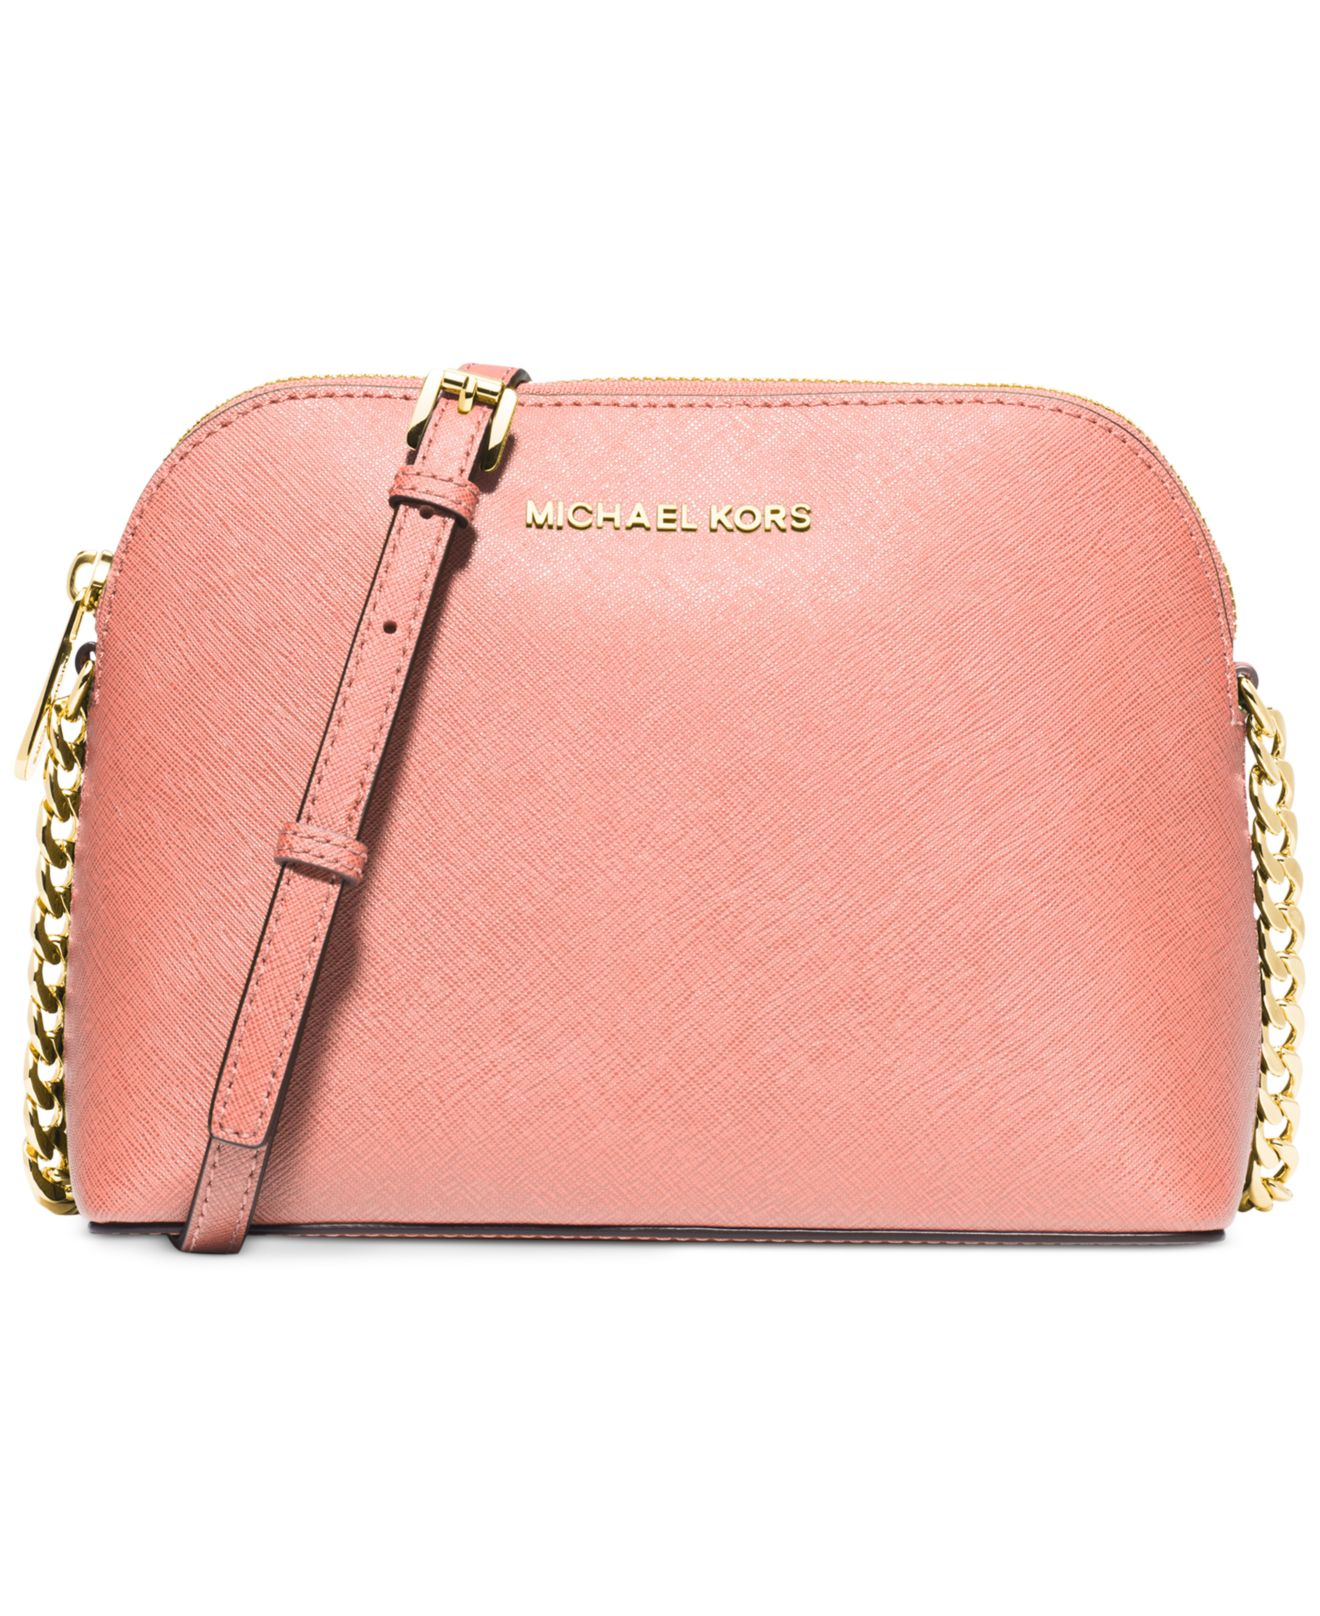 Michael kors Michael Cindy Large Dome Crossbody in Pink | Lyst